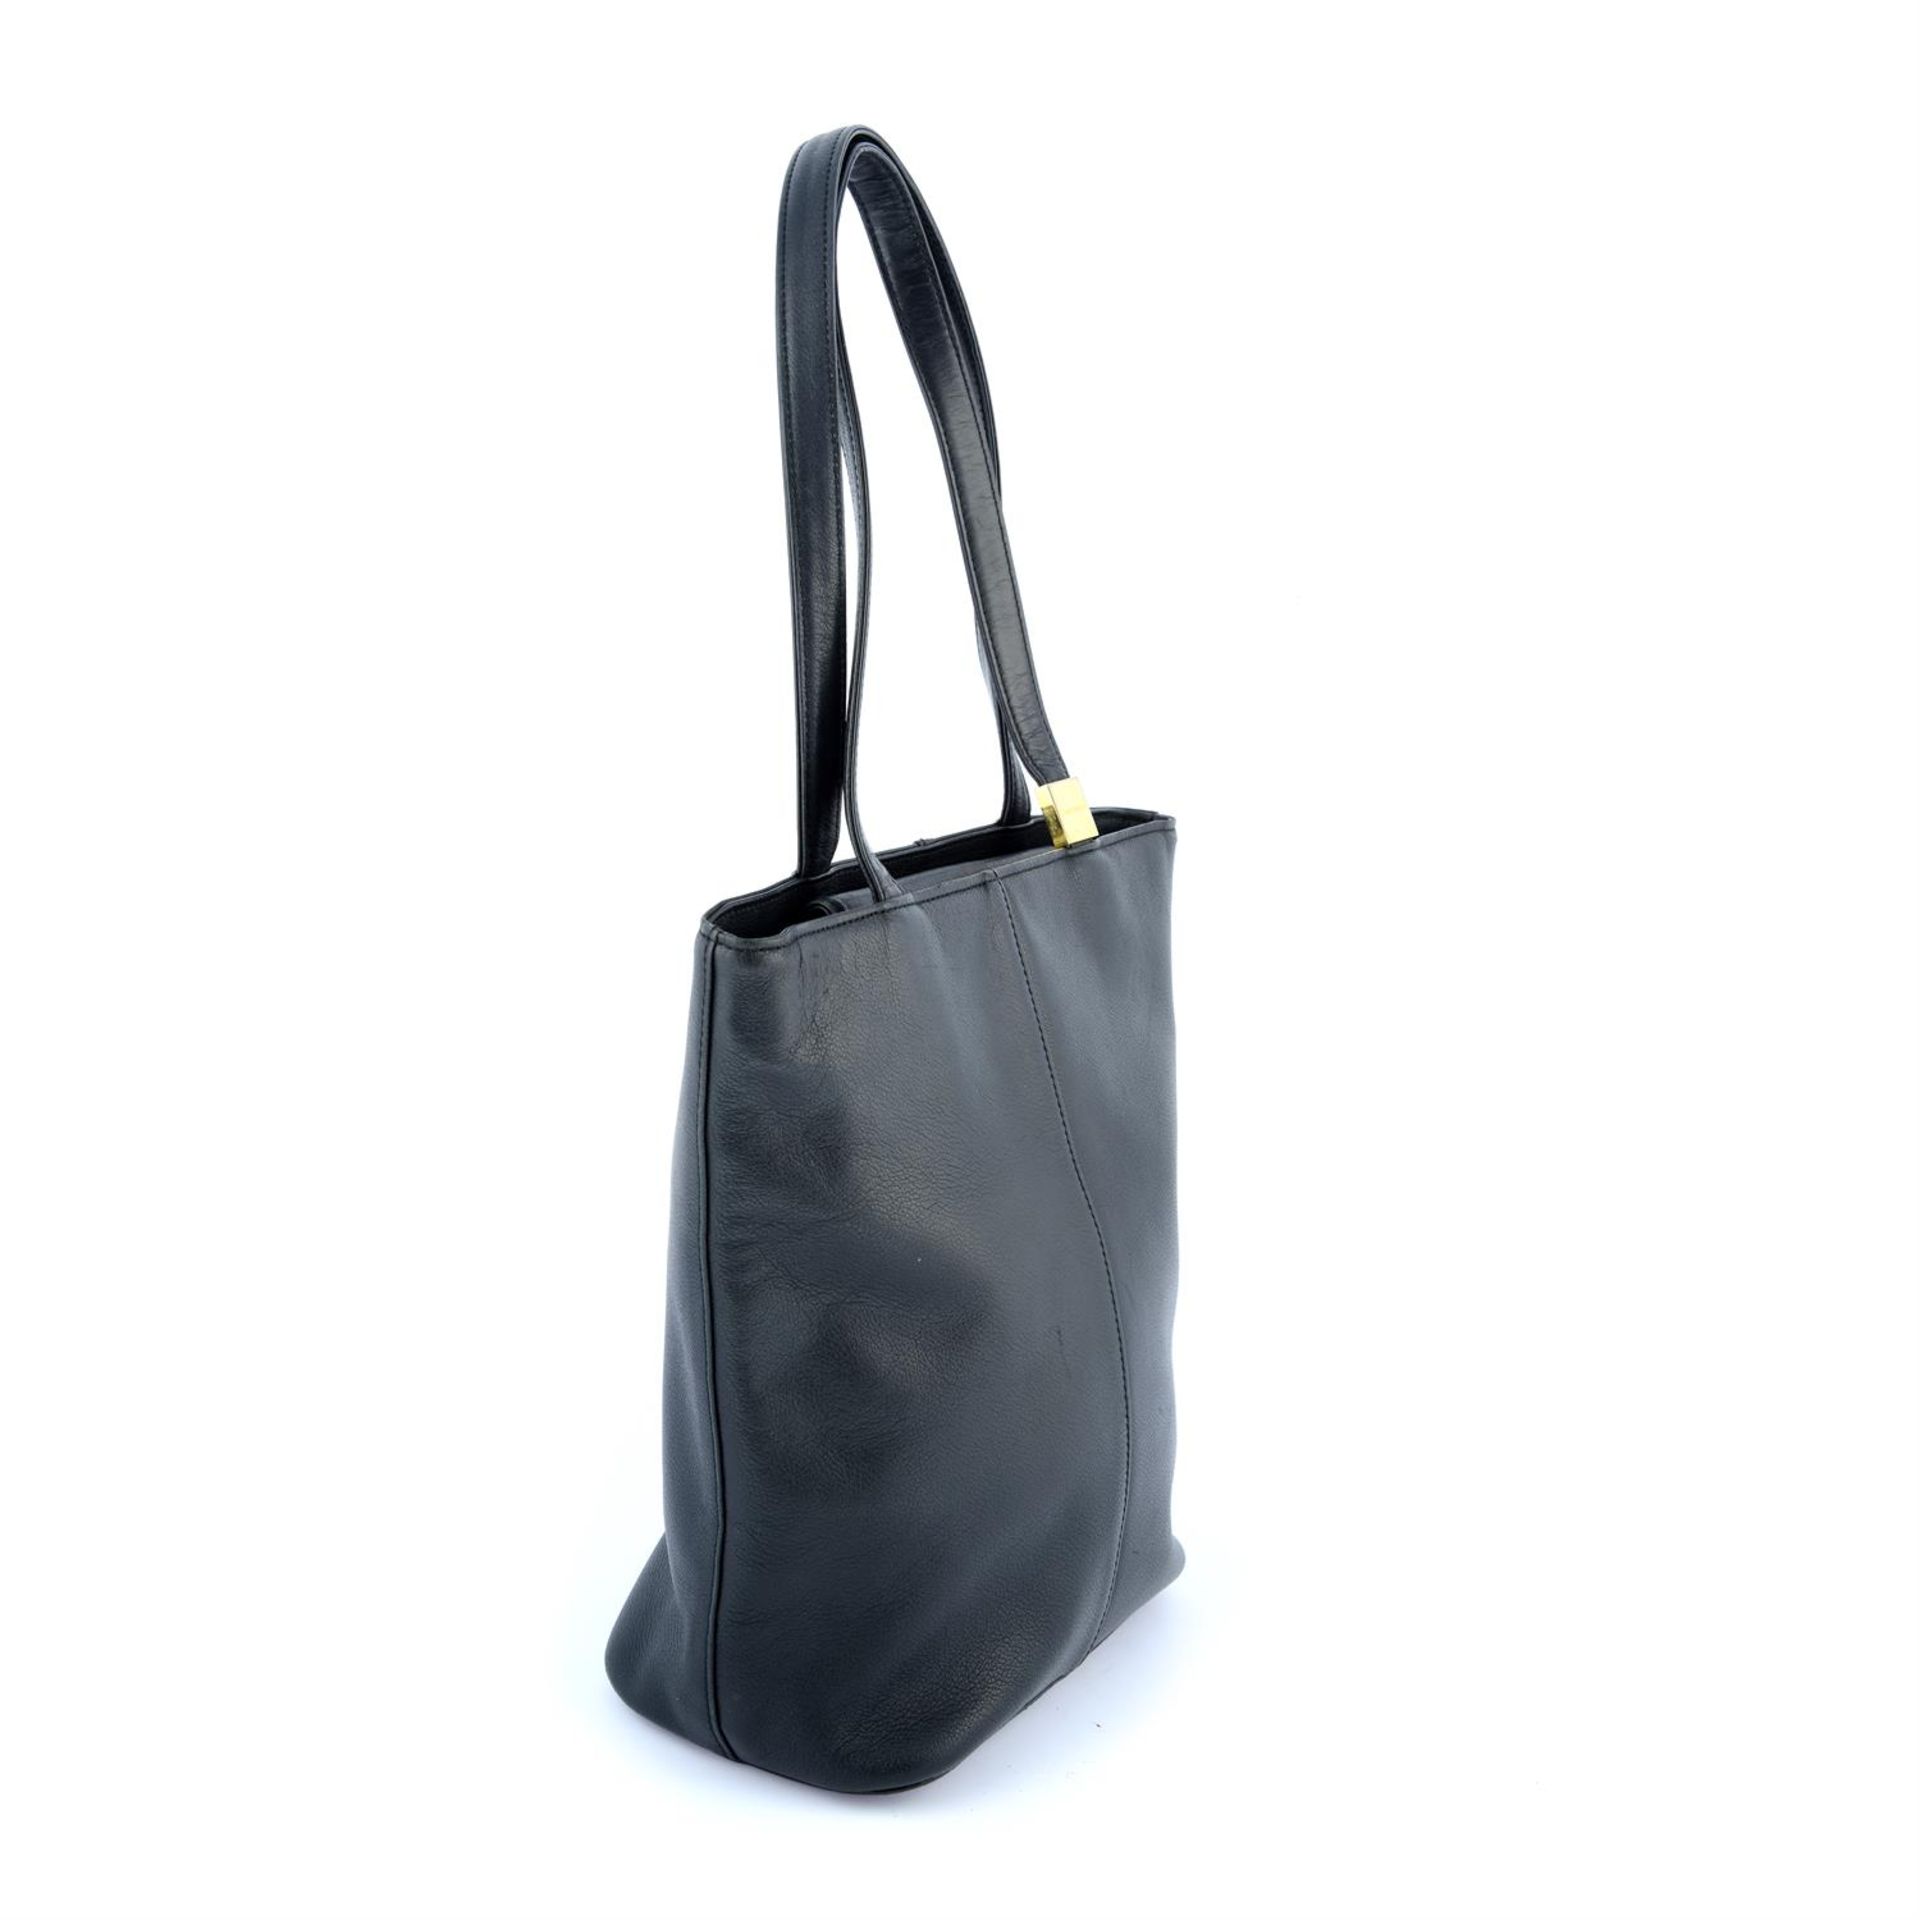 BURBERRY - a black leather tote. - Image 3 of 4